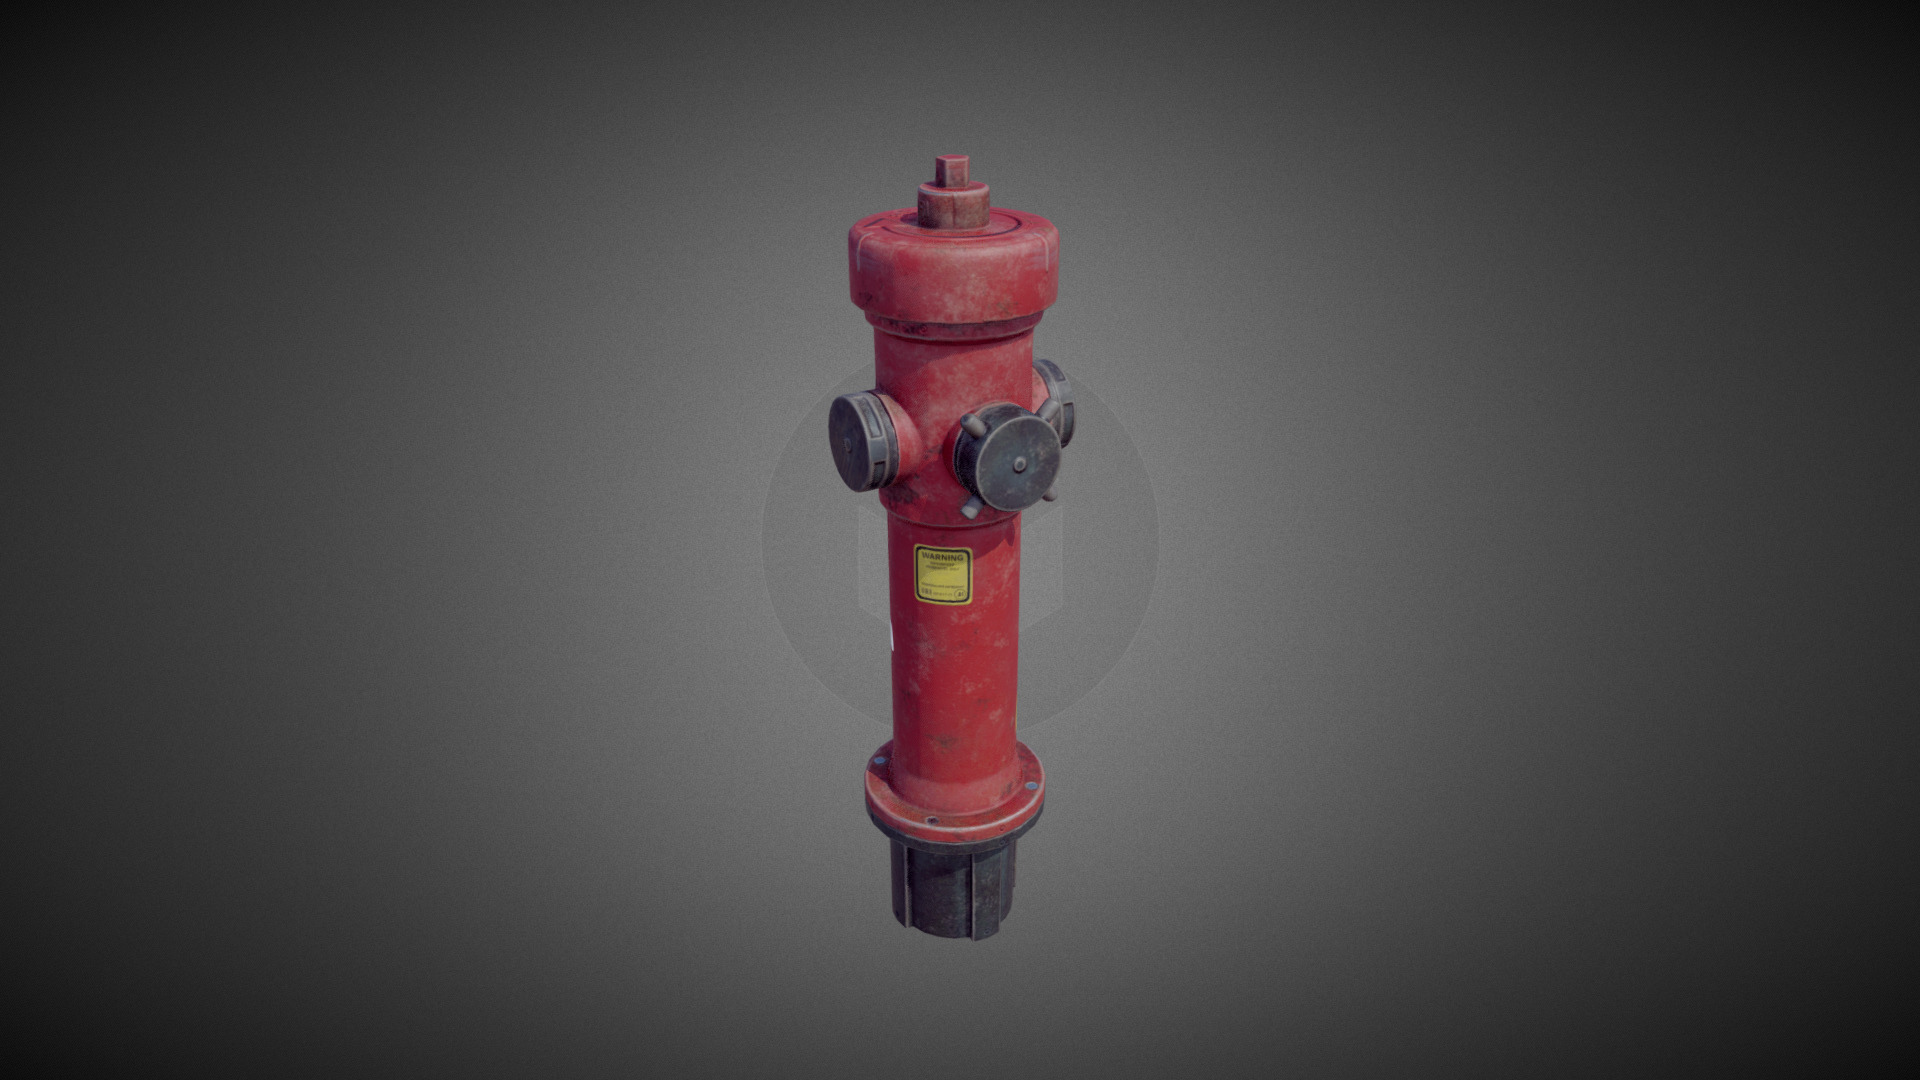 3D model Fire Hydrant - This is a 3D model of the Fire Hydrant. The 3D model is about a red fire hydrant.